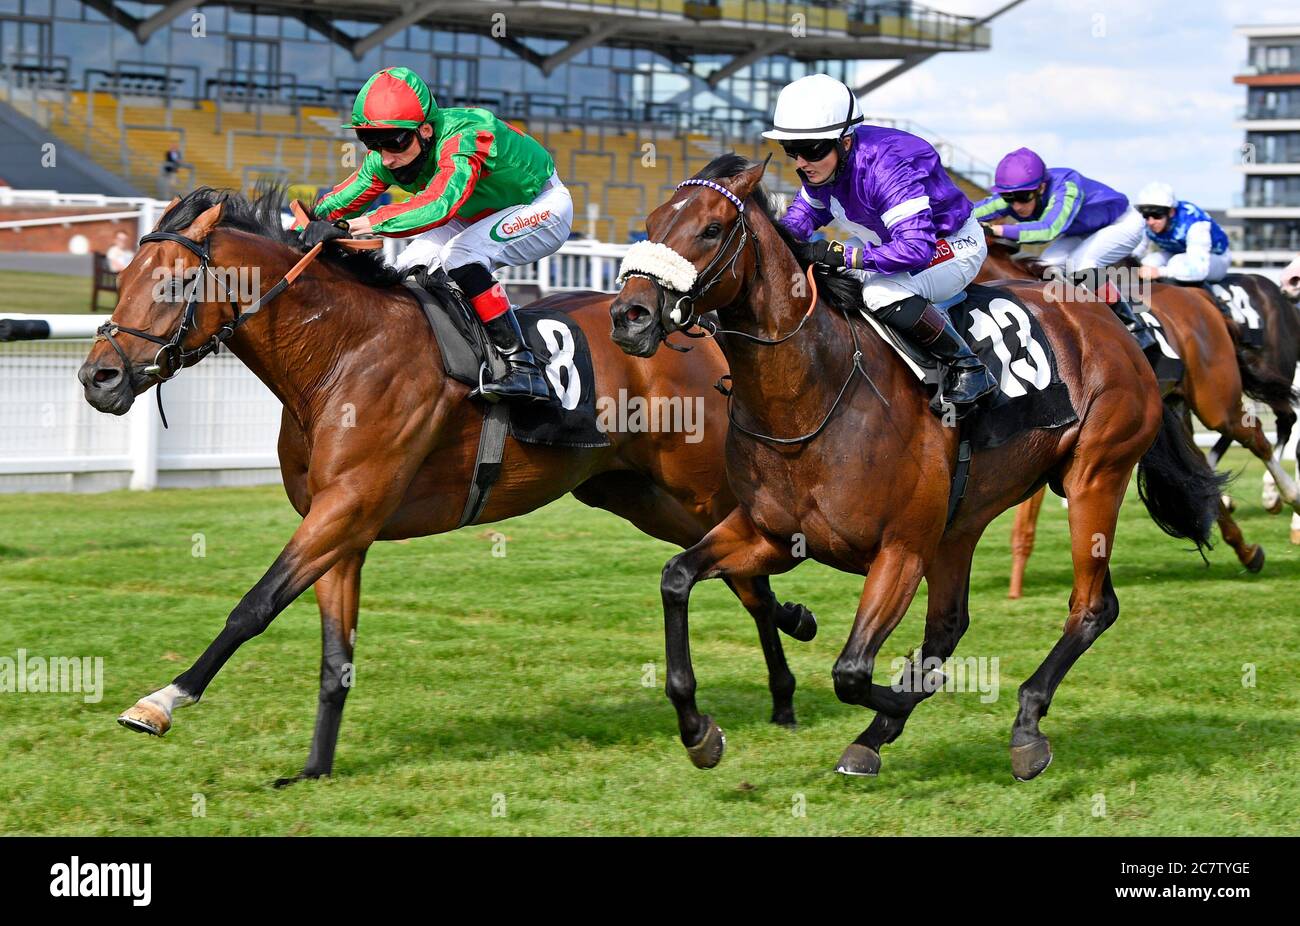 Karibana ridden by Shane Kelly (left) wins the Cash Out at bet365 Handicap Stakes at Newbury Racecourse. Stock Photo